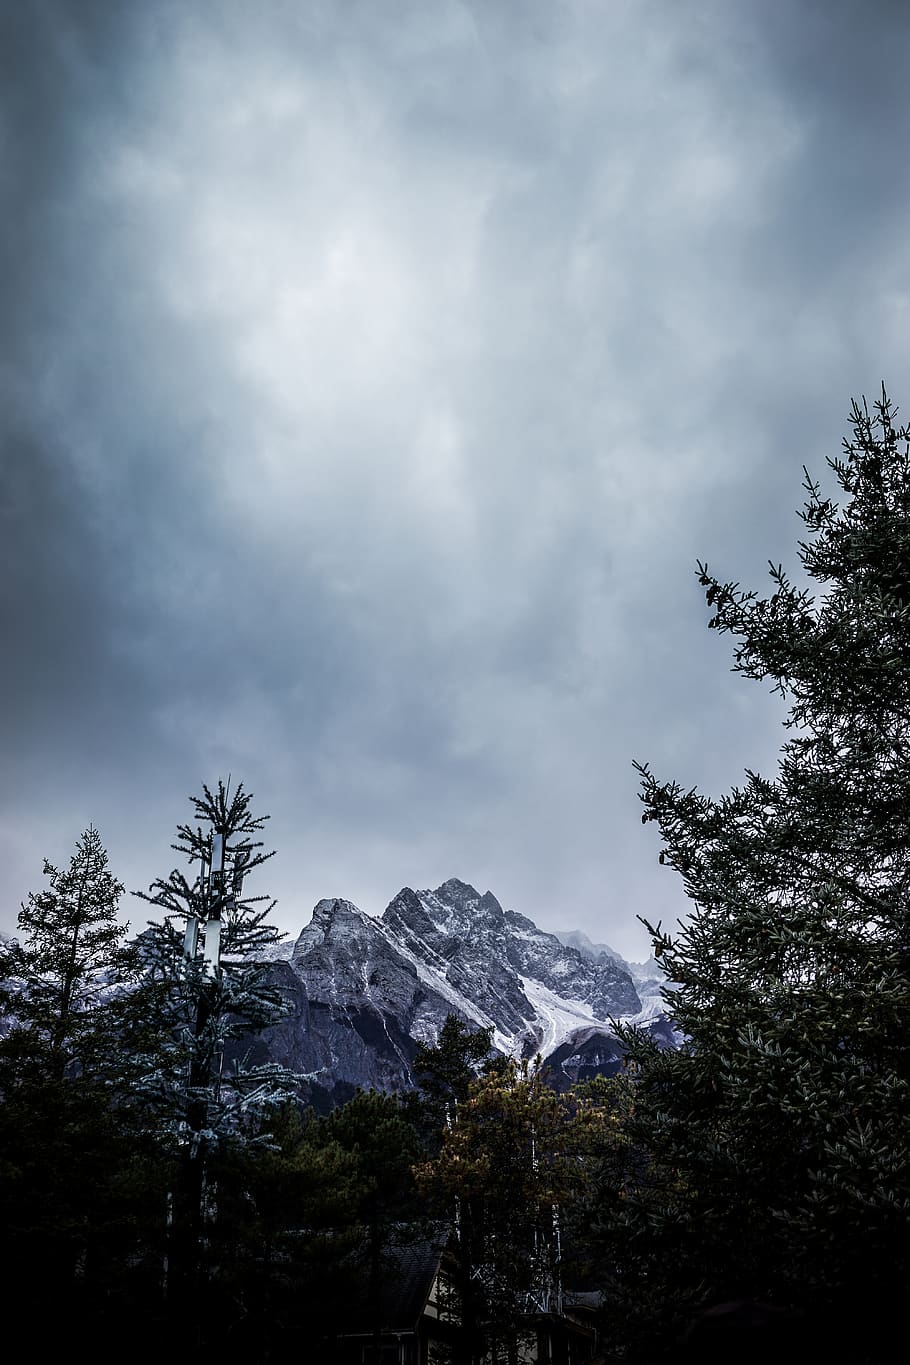 snow covered mountain under gray sky at daytime, plant, tree